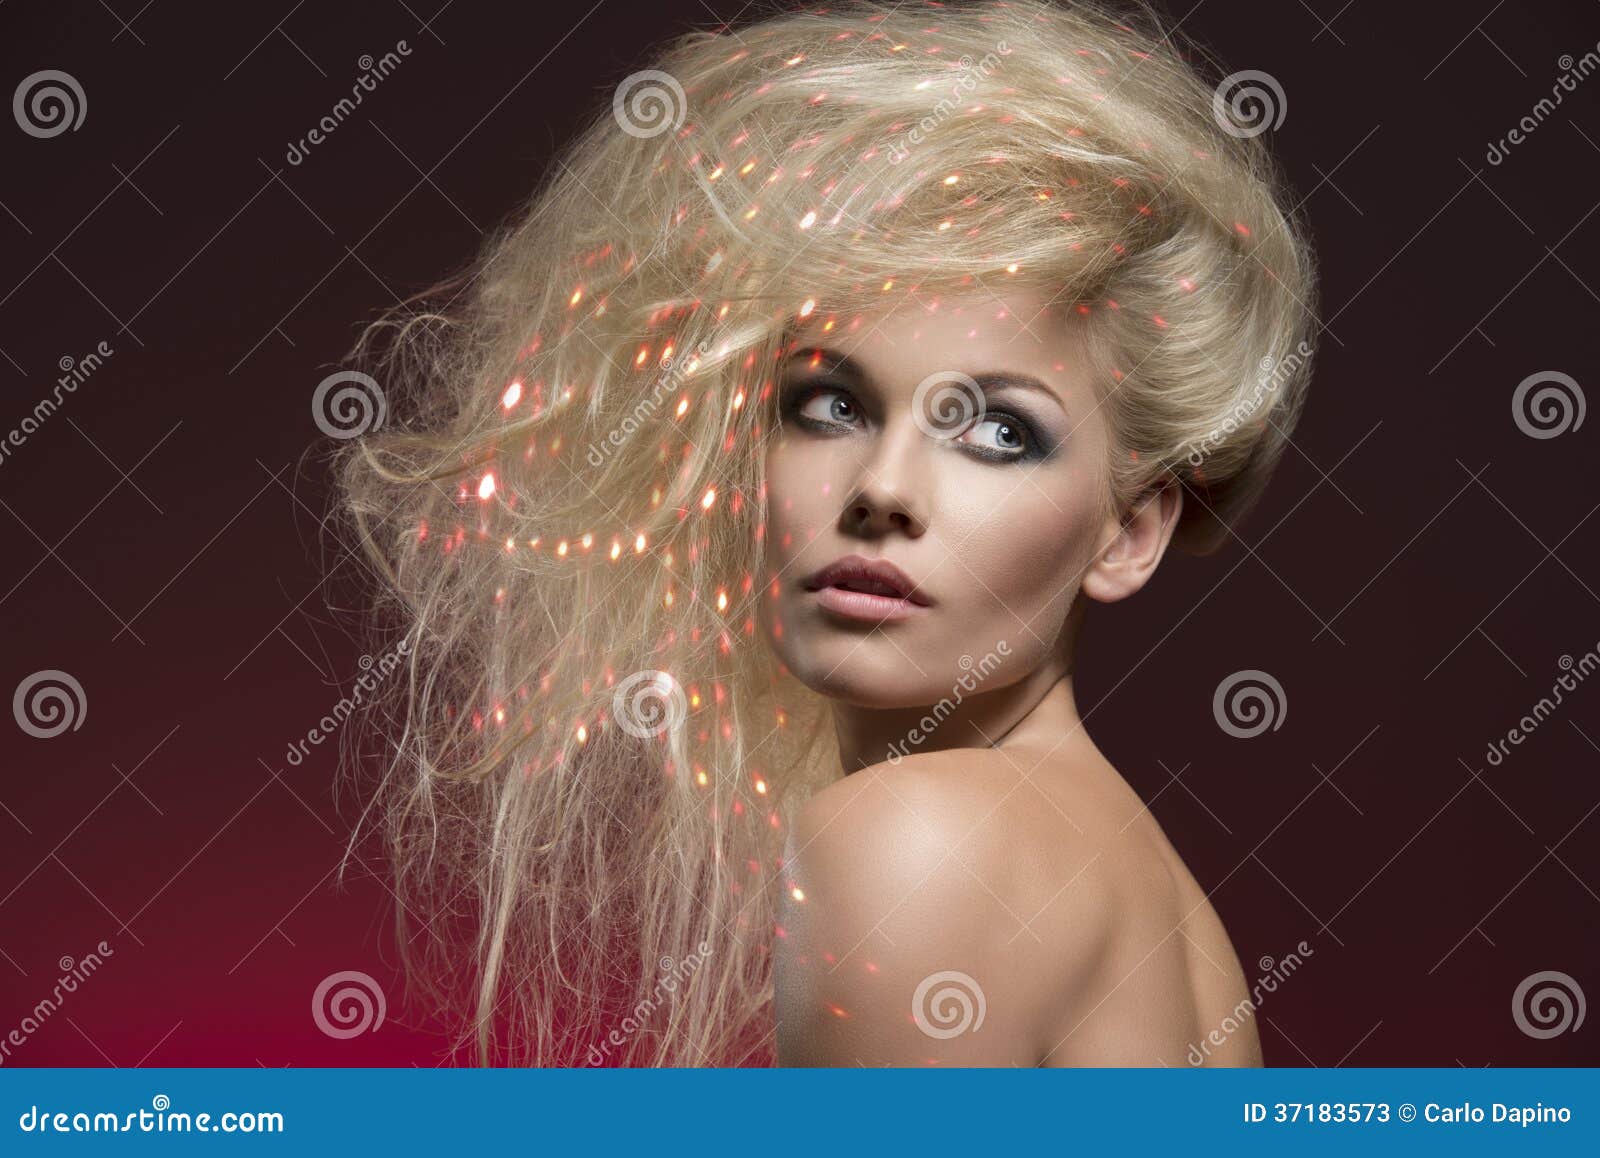 Girl With Strange Hair Style Stock Image Image Of Attractive People